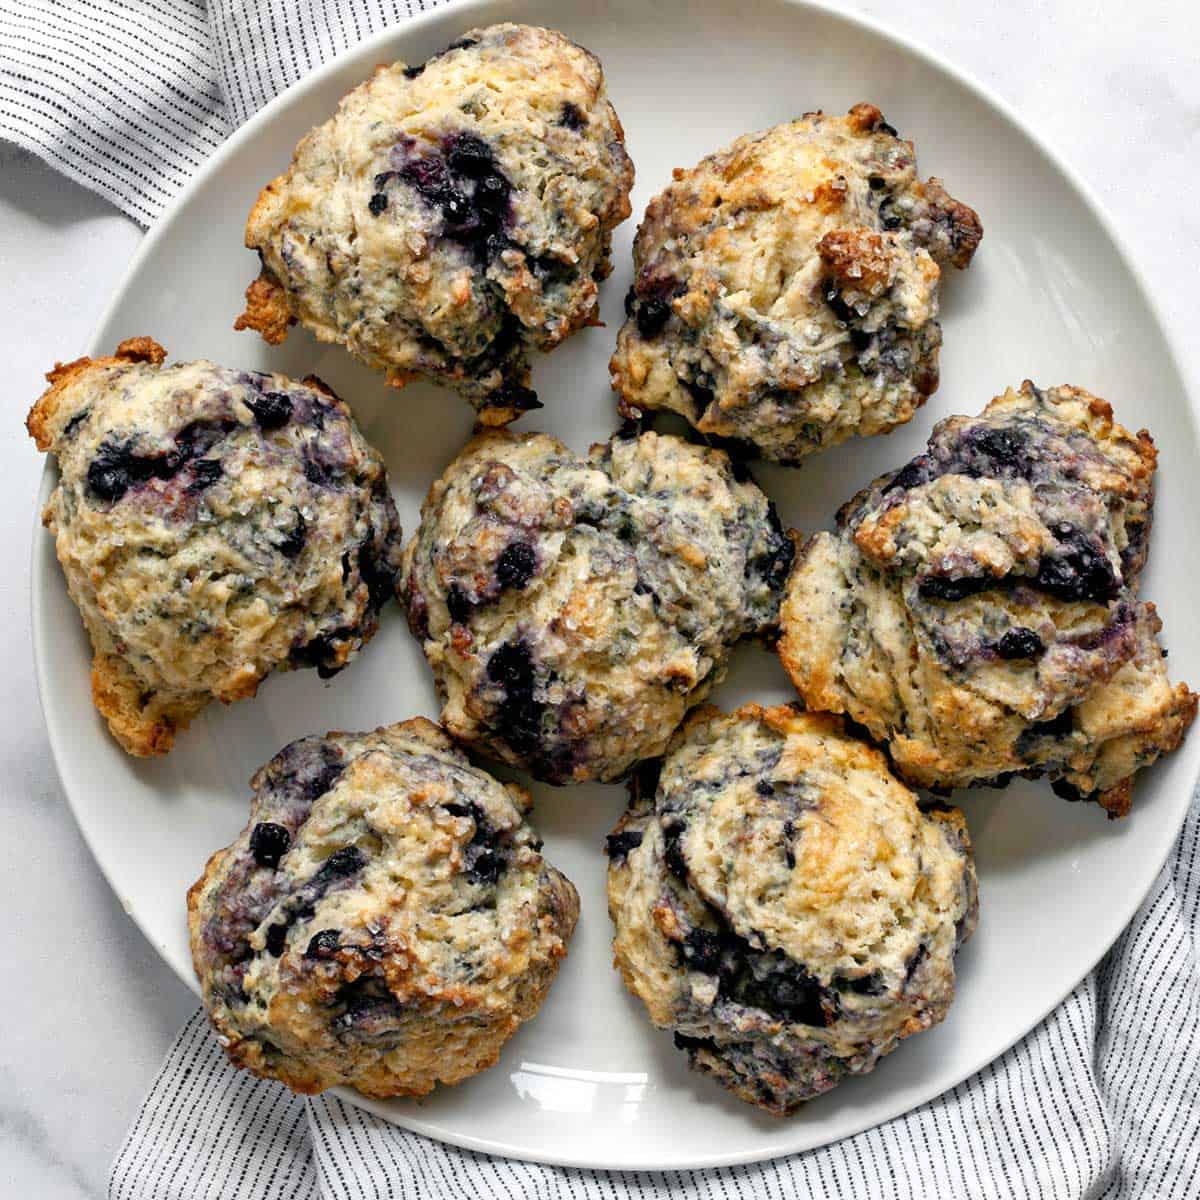 Scone and Muffin Scoop